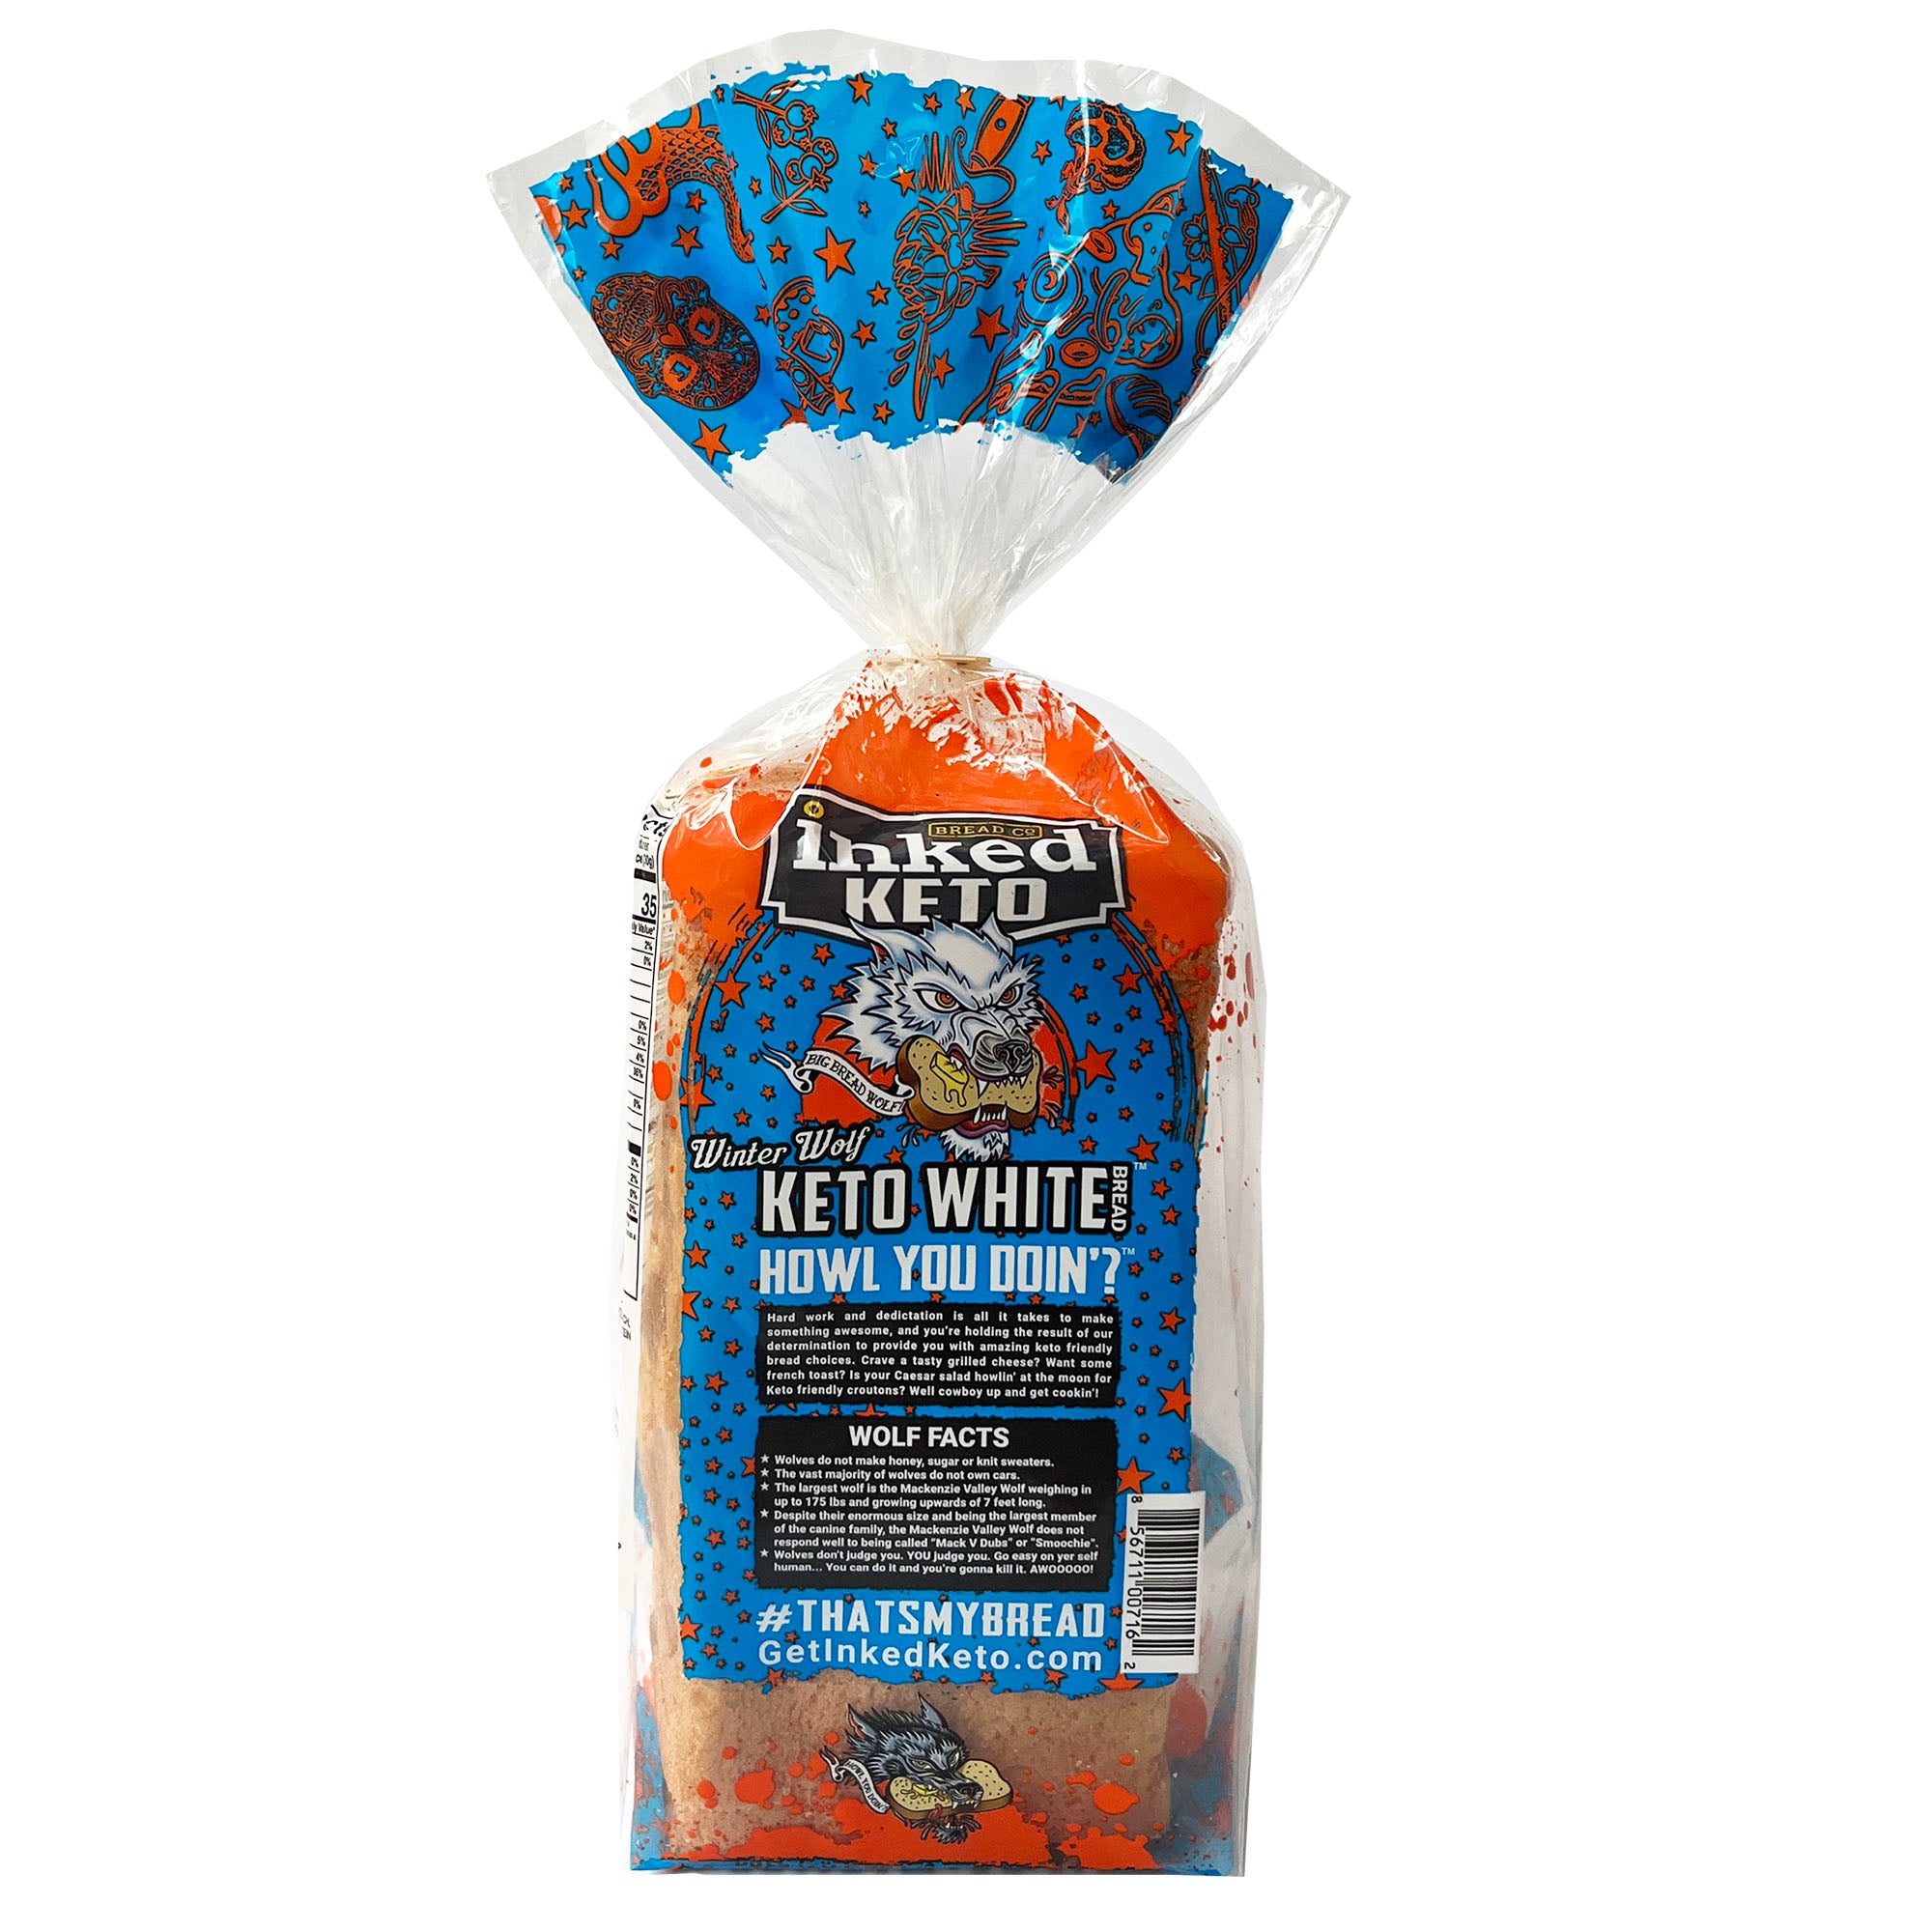 Winter Wolf Keto White Bread (Not available for individual sale)